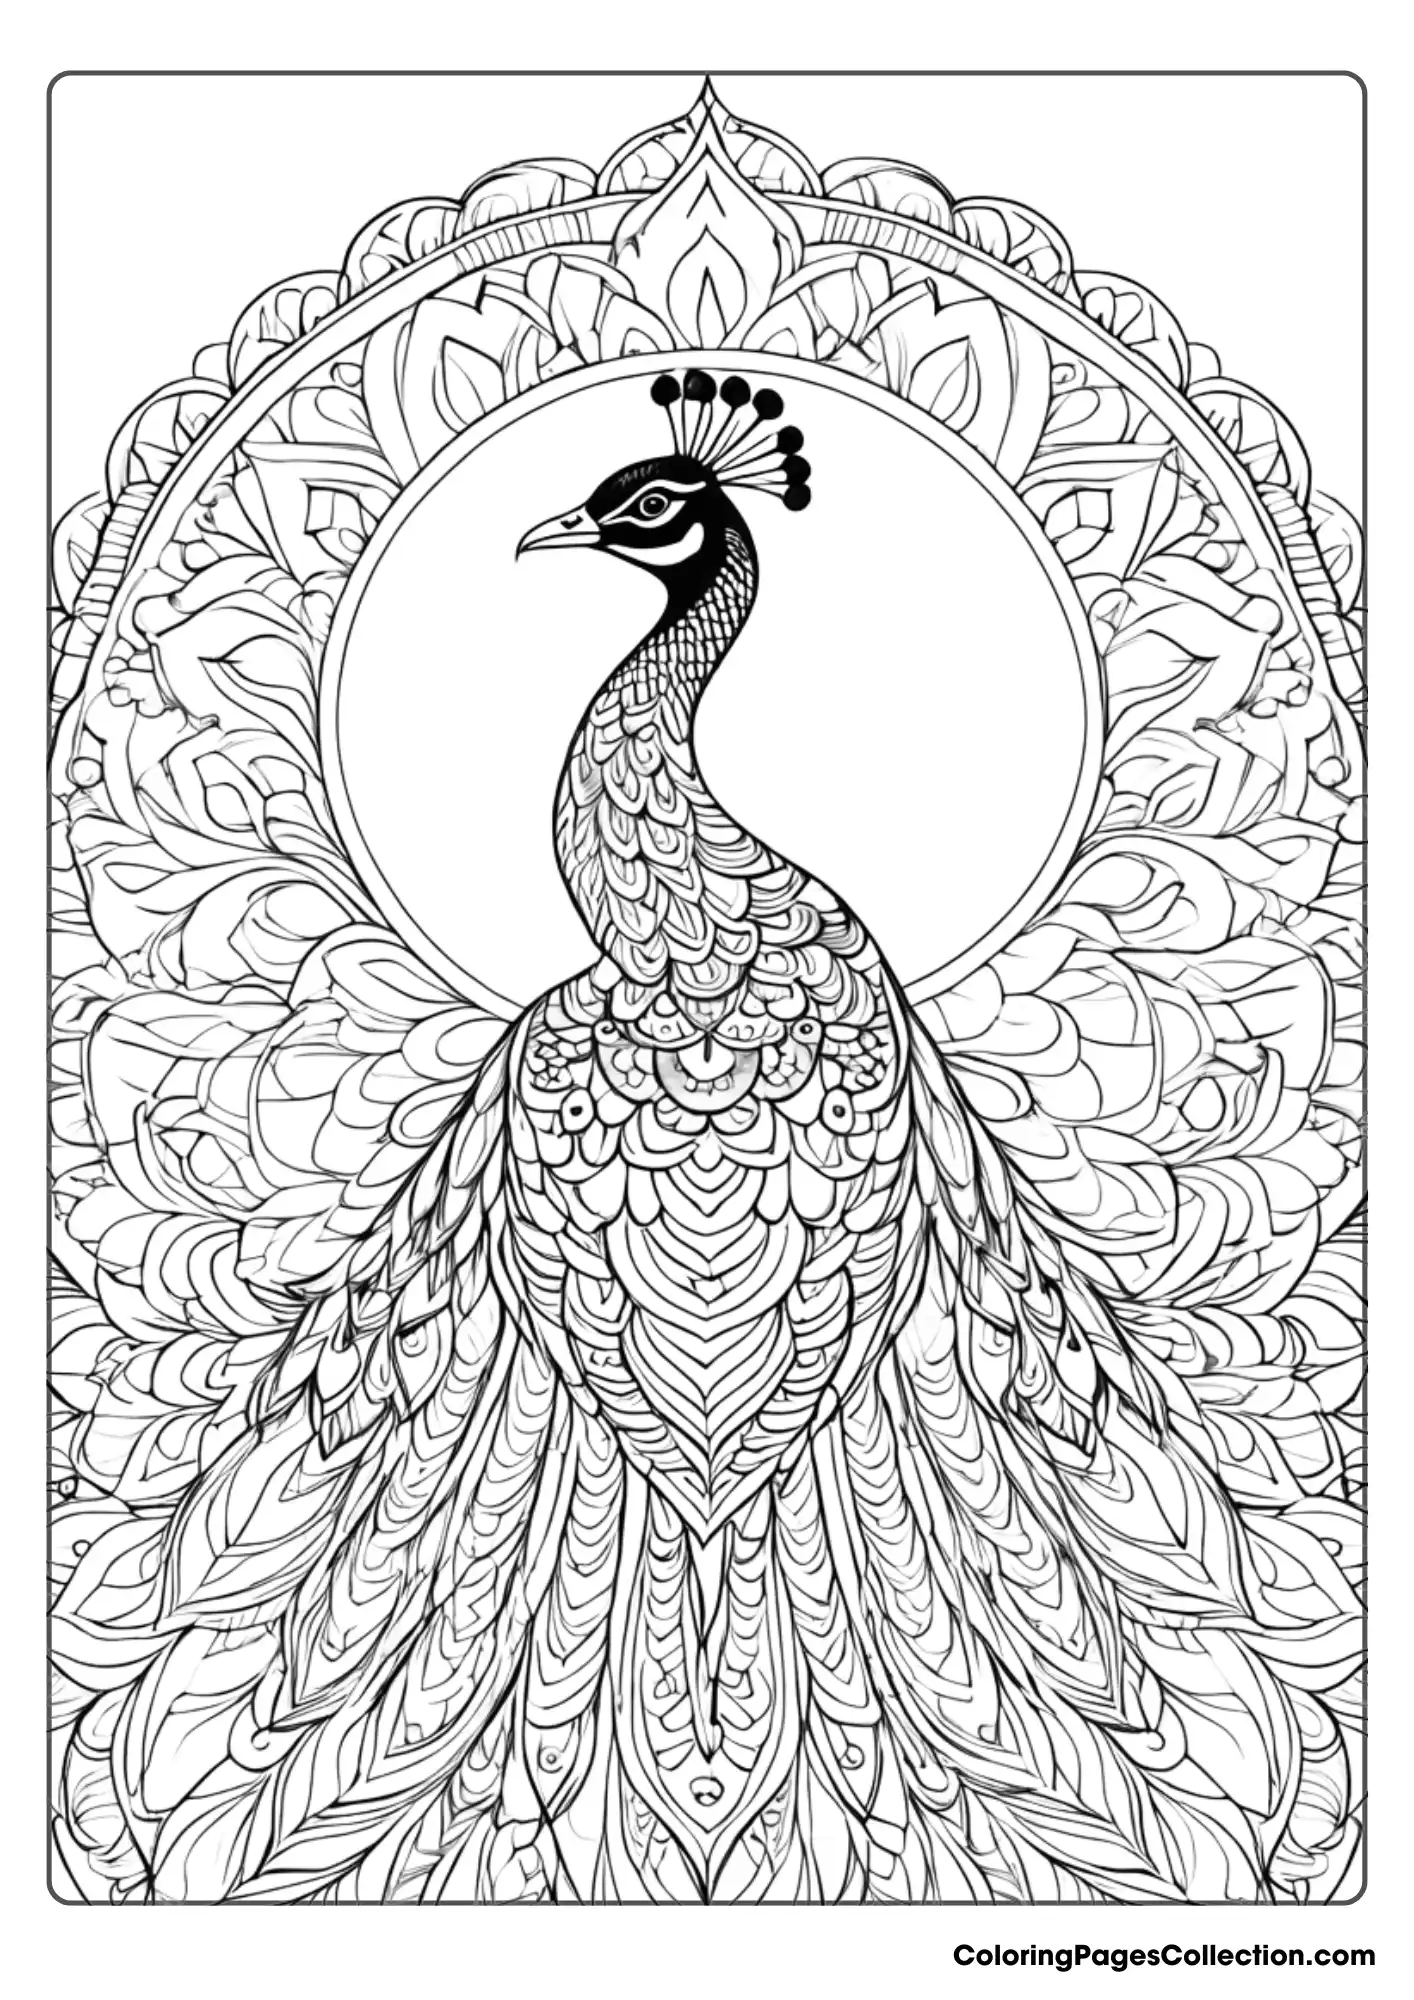 Coloring pages for teens, Peacock